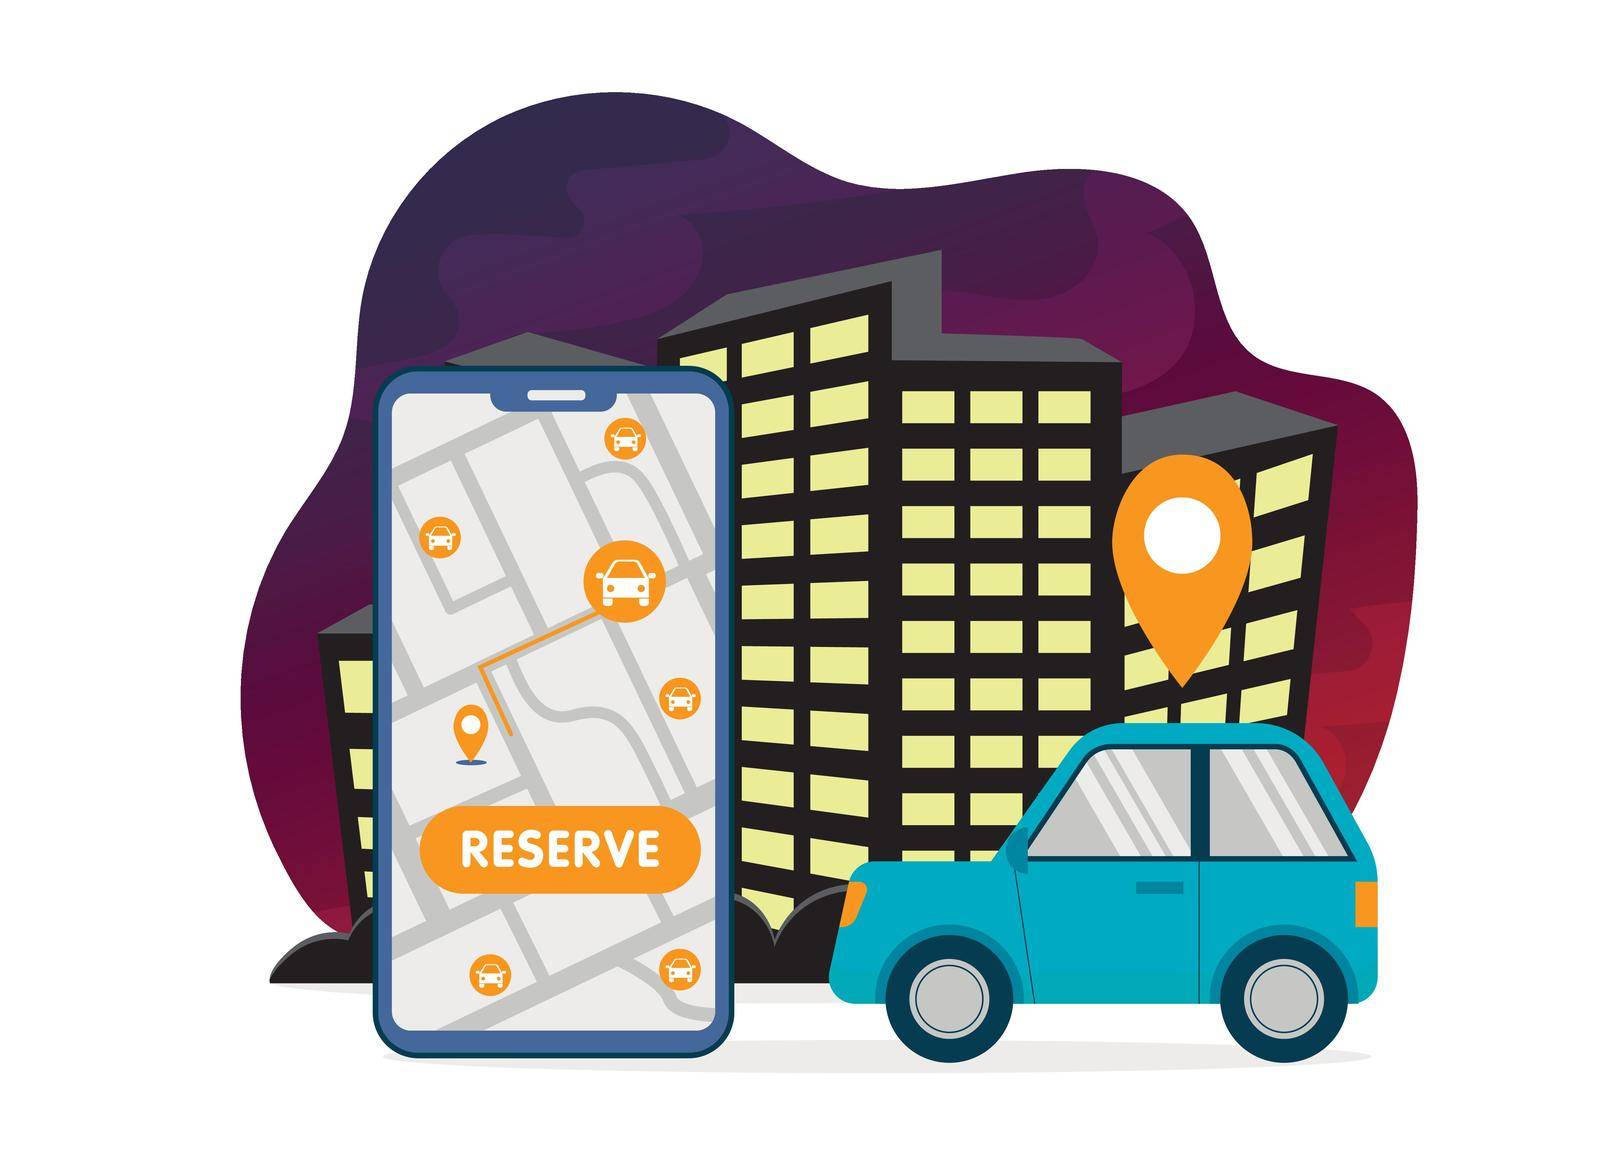 Simple car sharing illustration with big smartphone with free car search and reservation map and pink car in flat style on night city skyscrapers background.